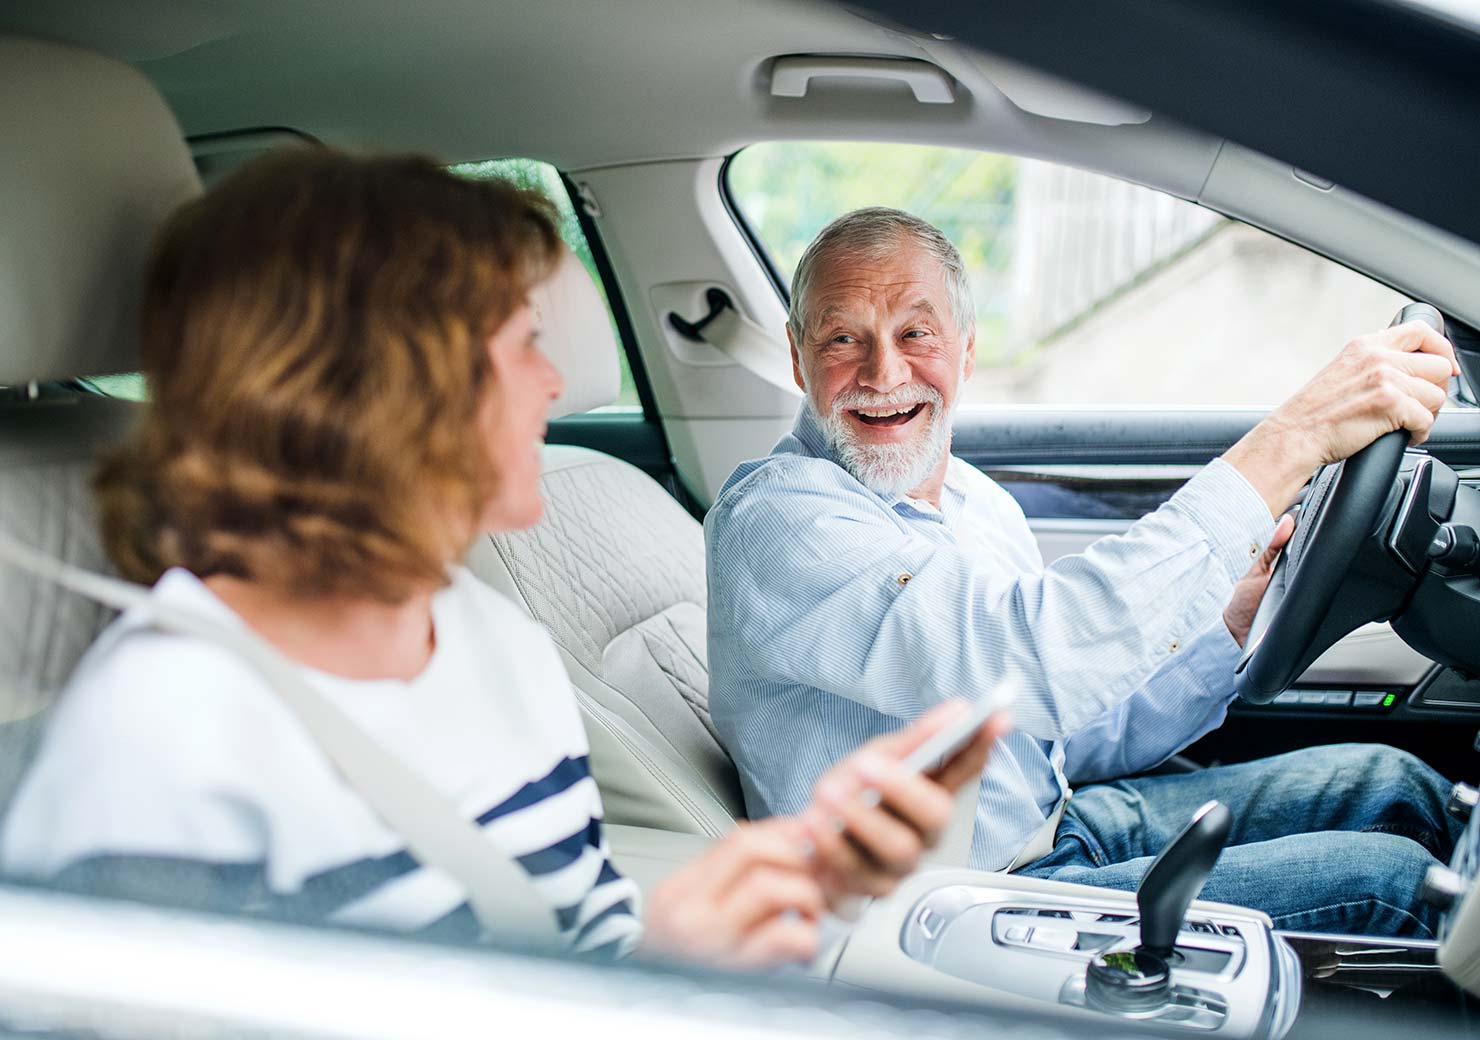 DriveABLE restores confidence in drivers and enhances physician’s treatment plans